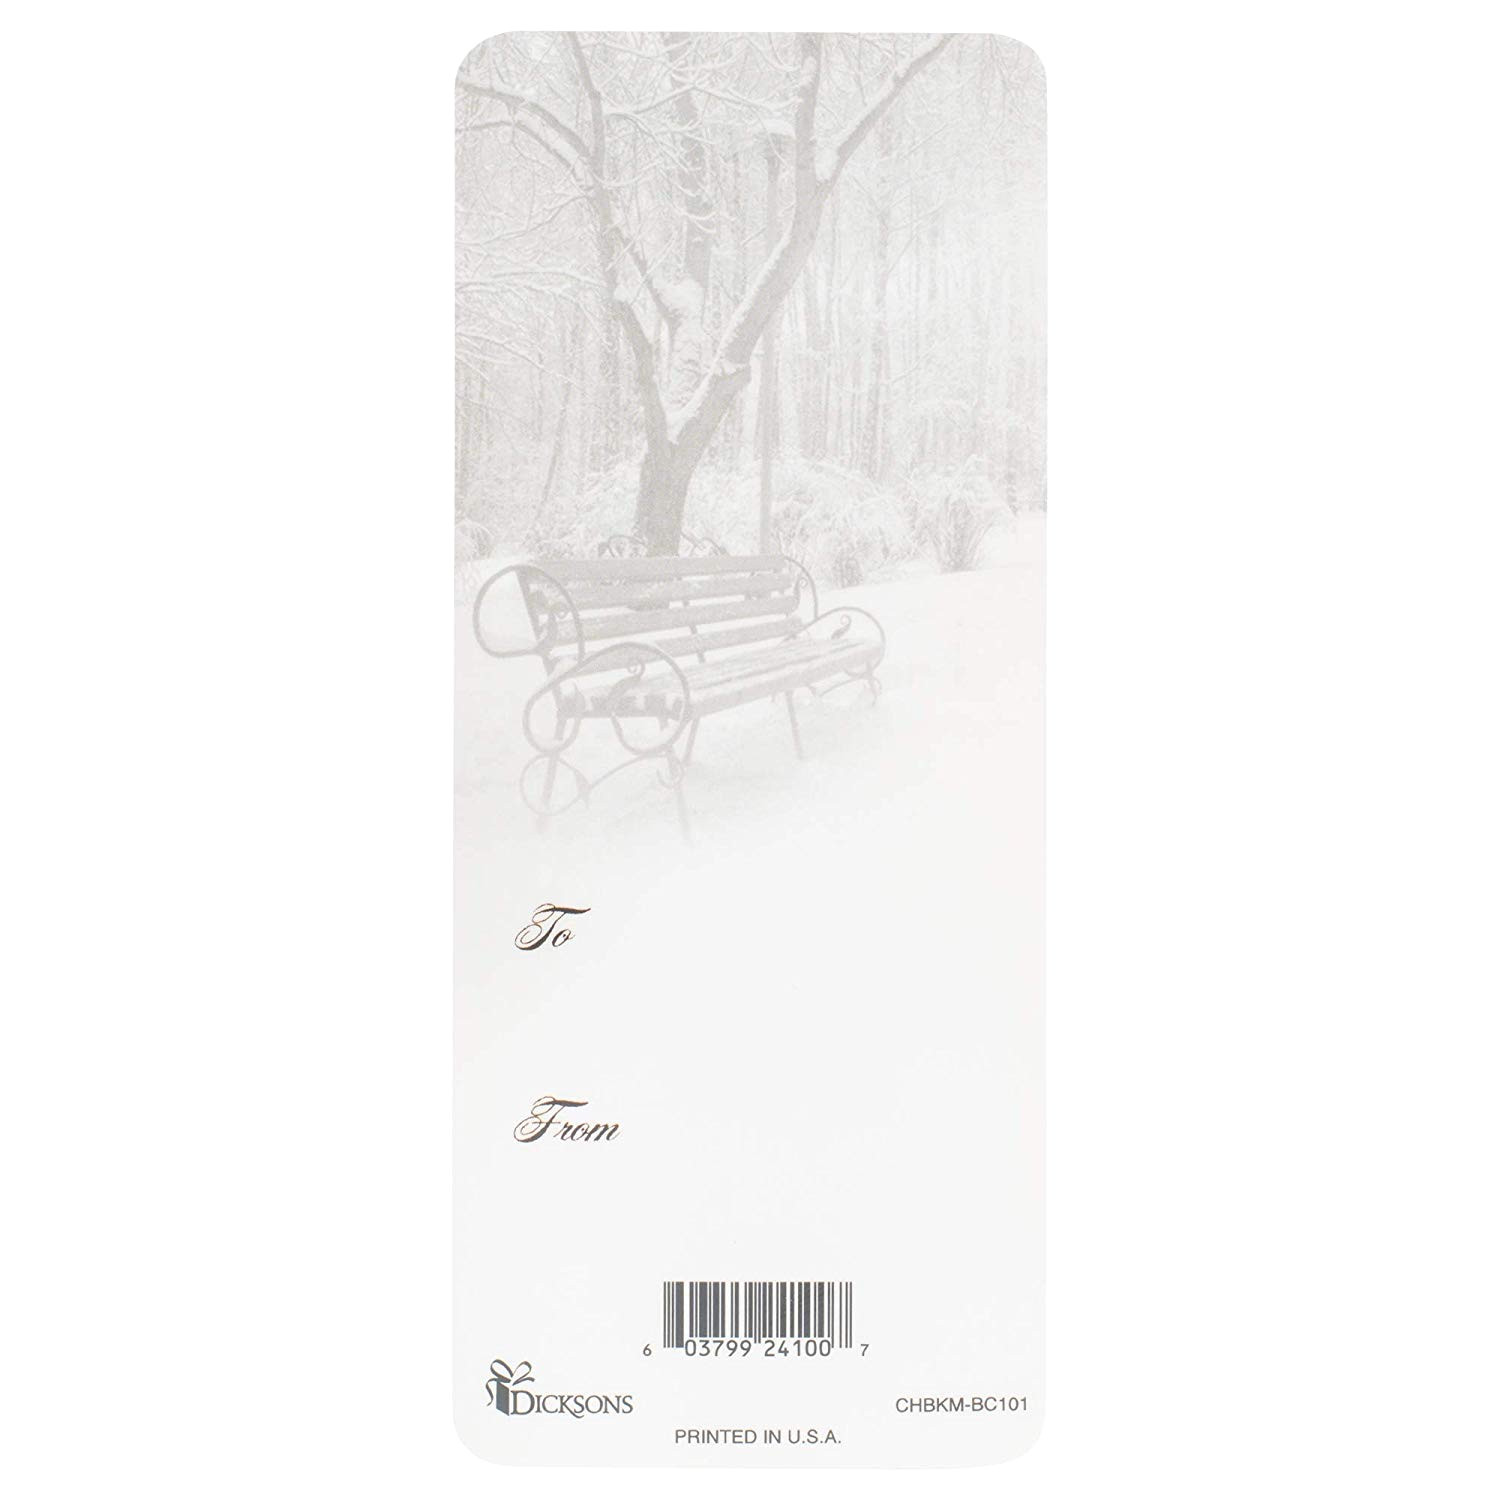 amazon com missing you at christmas winter white 6 x 3 paperboard bookmarks pack of 12 office products